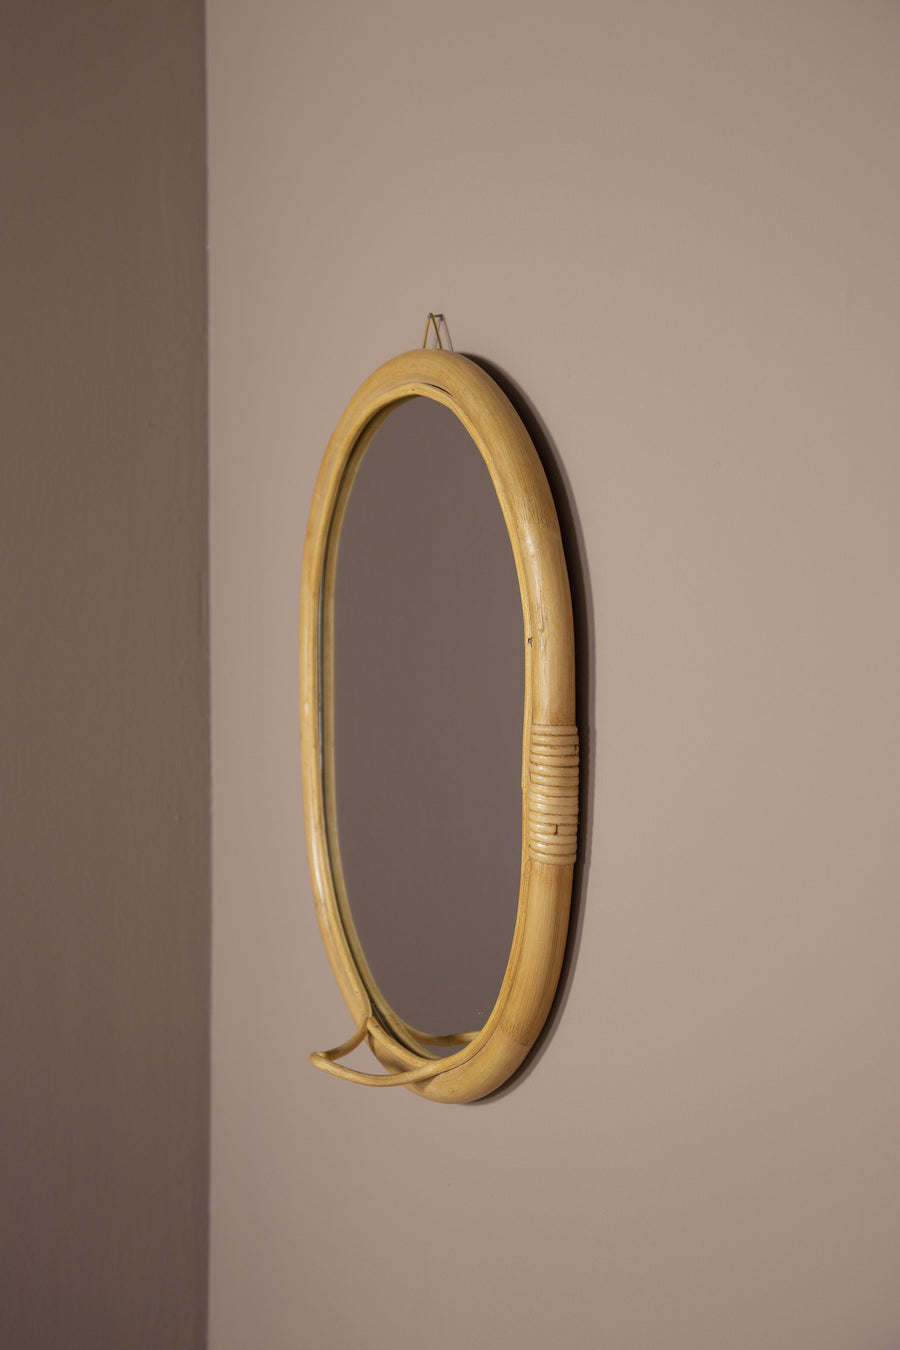 Oval rattan mirror with hook - Childhome